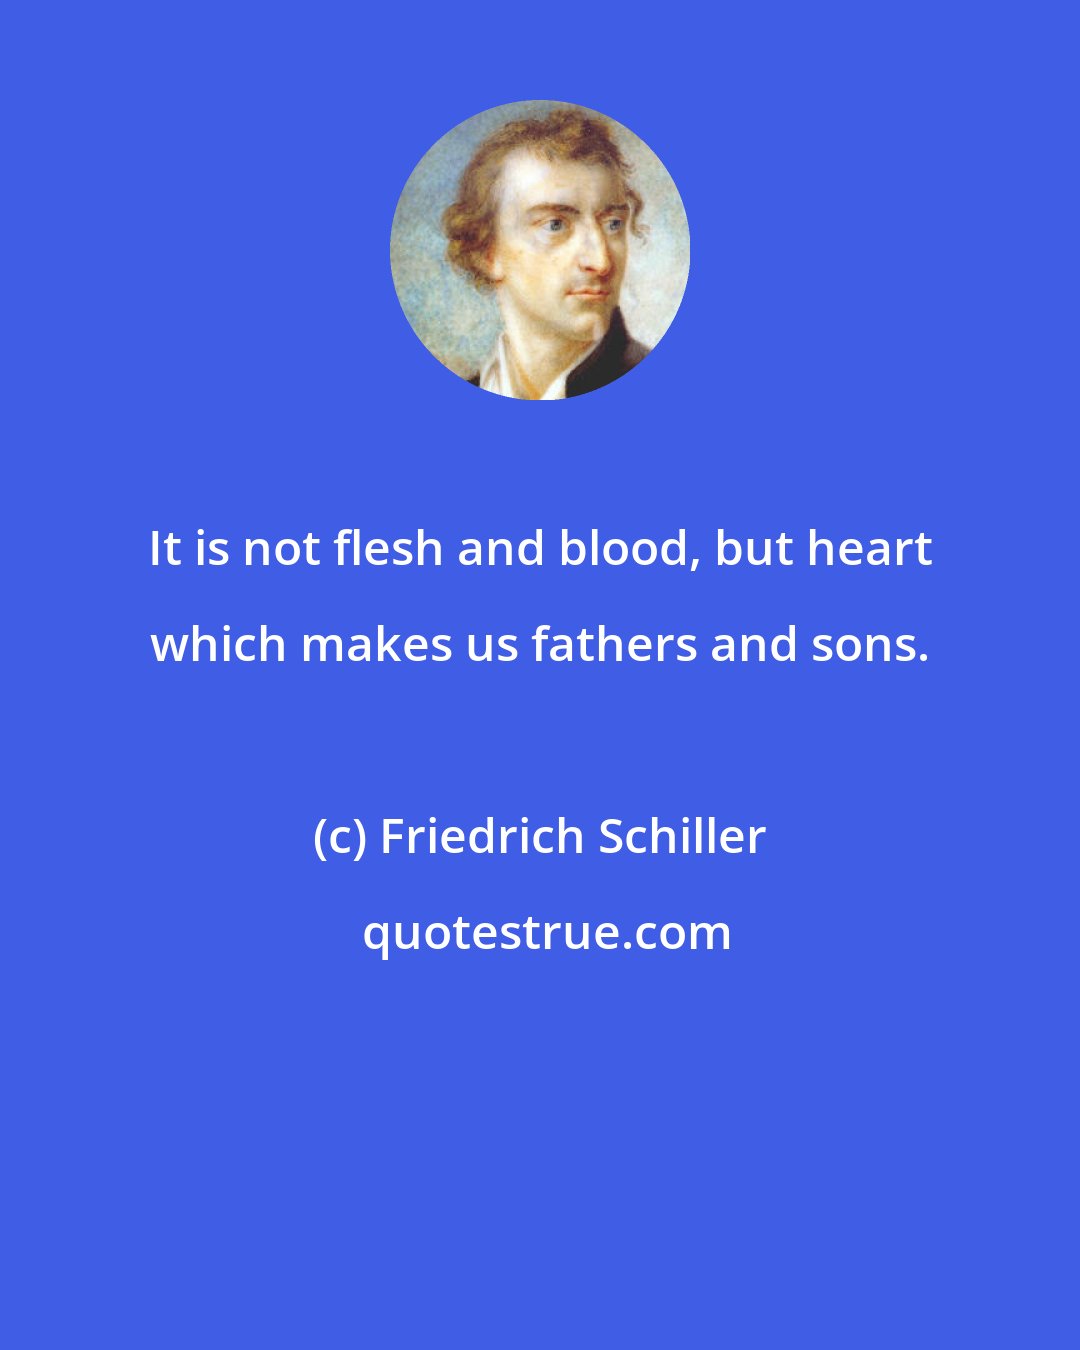 Friedrich Schiller: It is not flesh and blood, but heart which makes us fathers and sons.